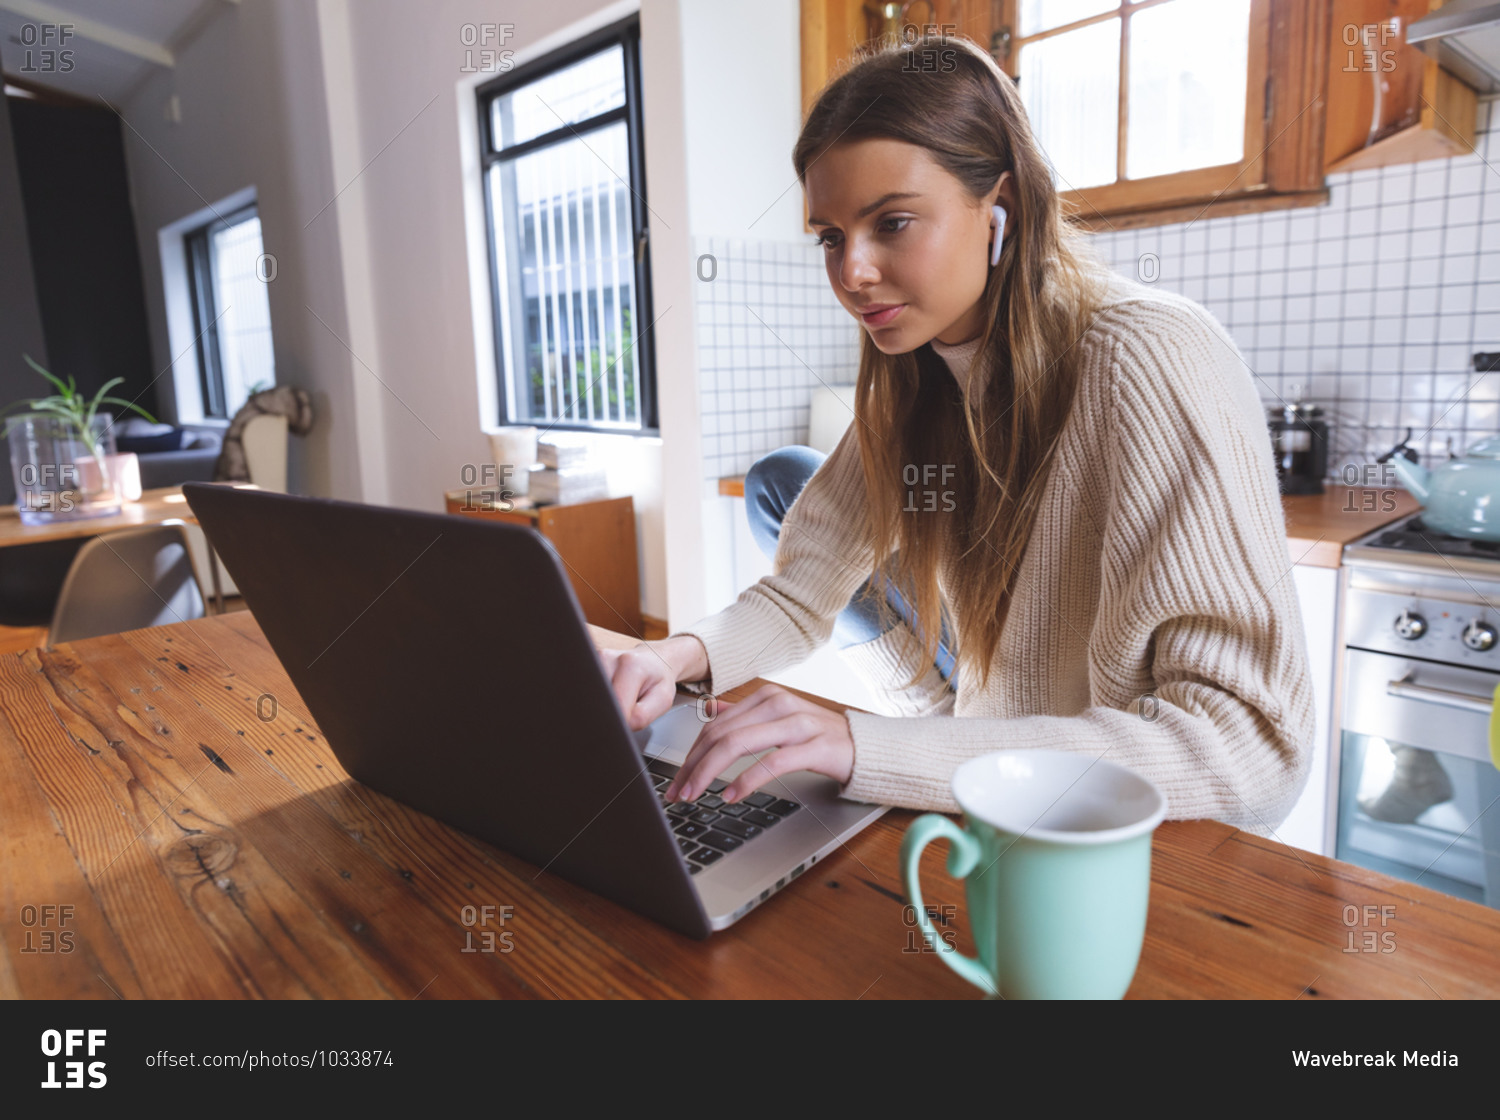 Caucasian woman spending time at home, sitting in kitchen using laptop computer with earphones on. Social distancing during Covid 19 Coronavirus quarantine lockdown.